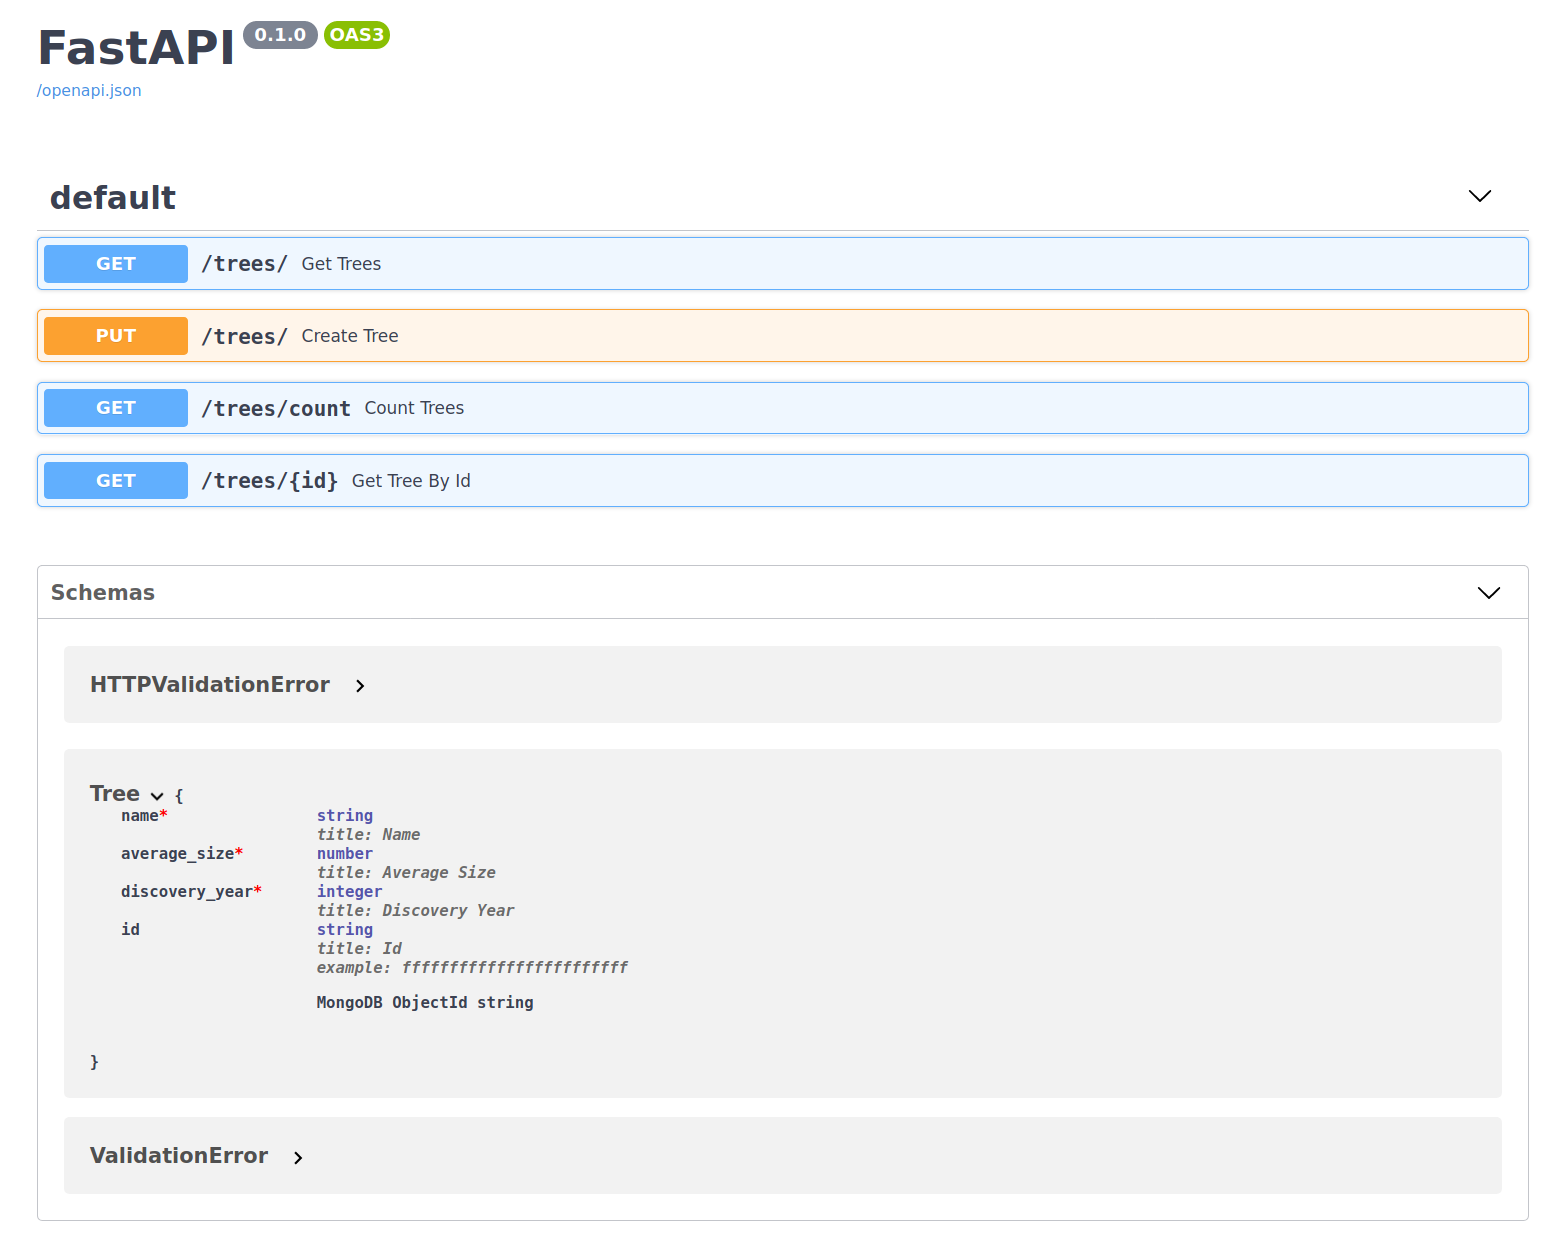 Swagger for the created Tree API